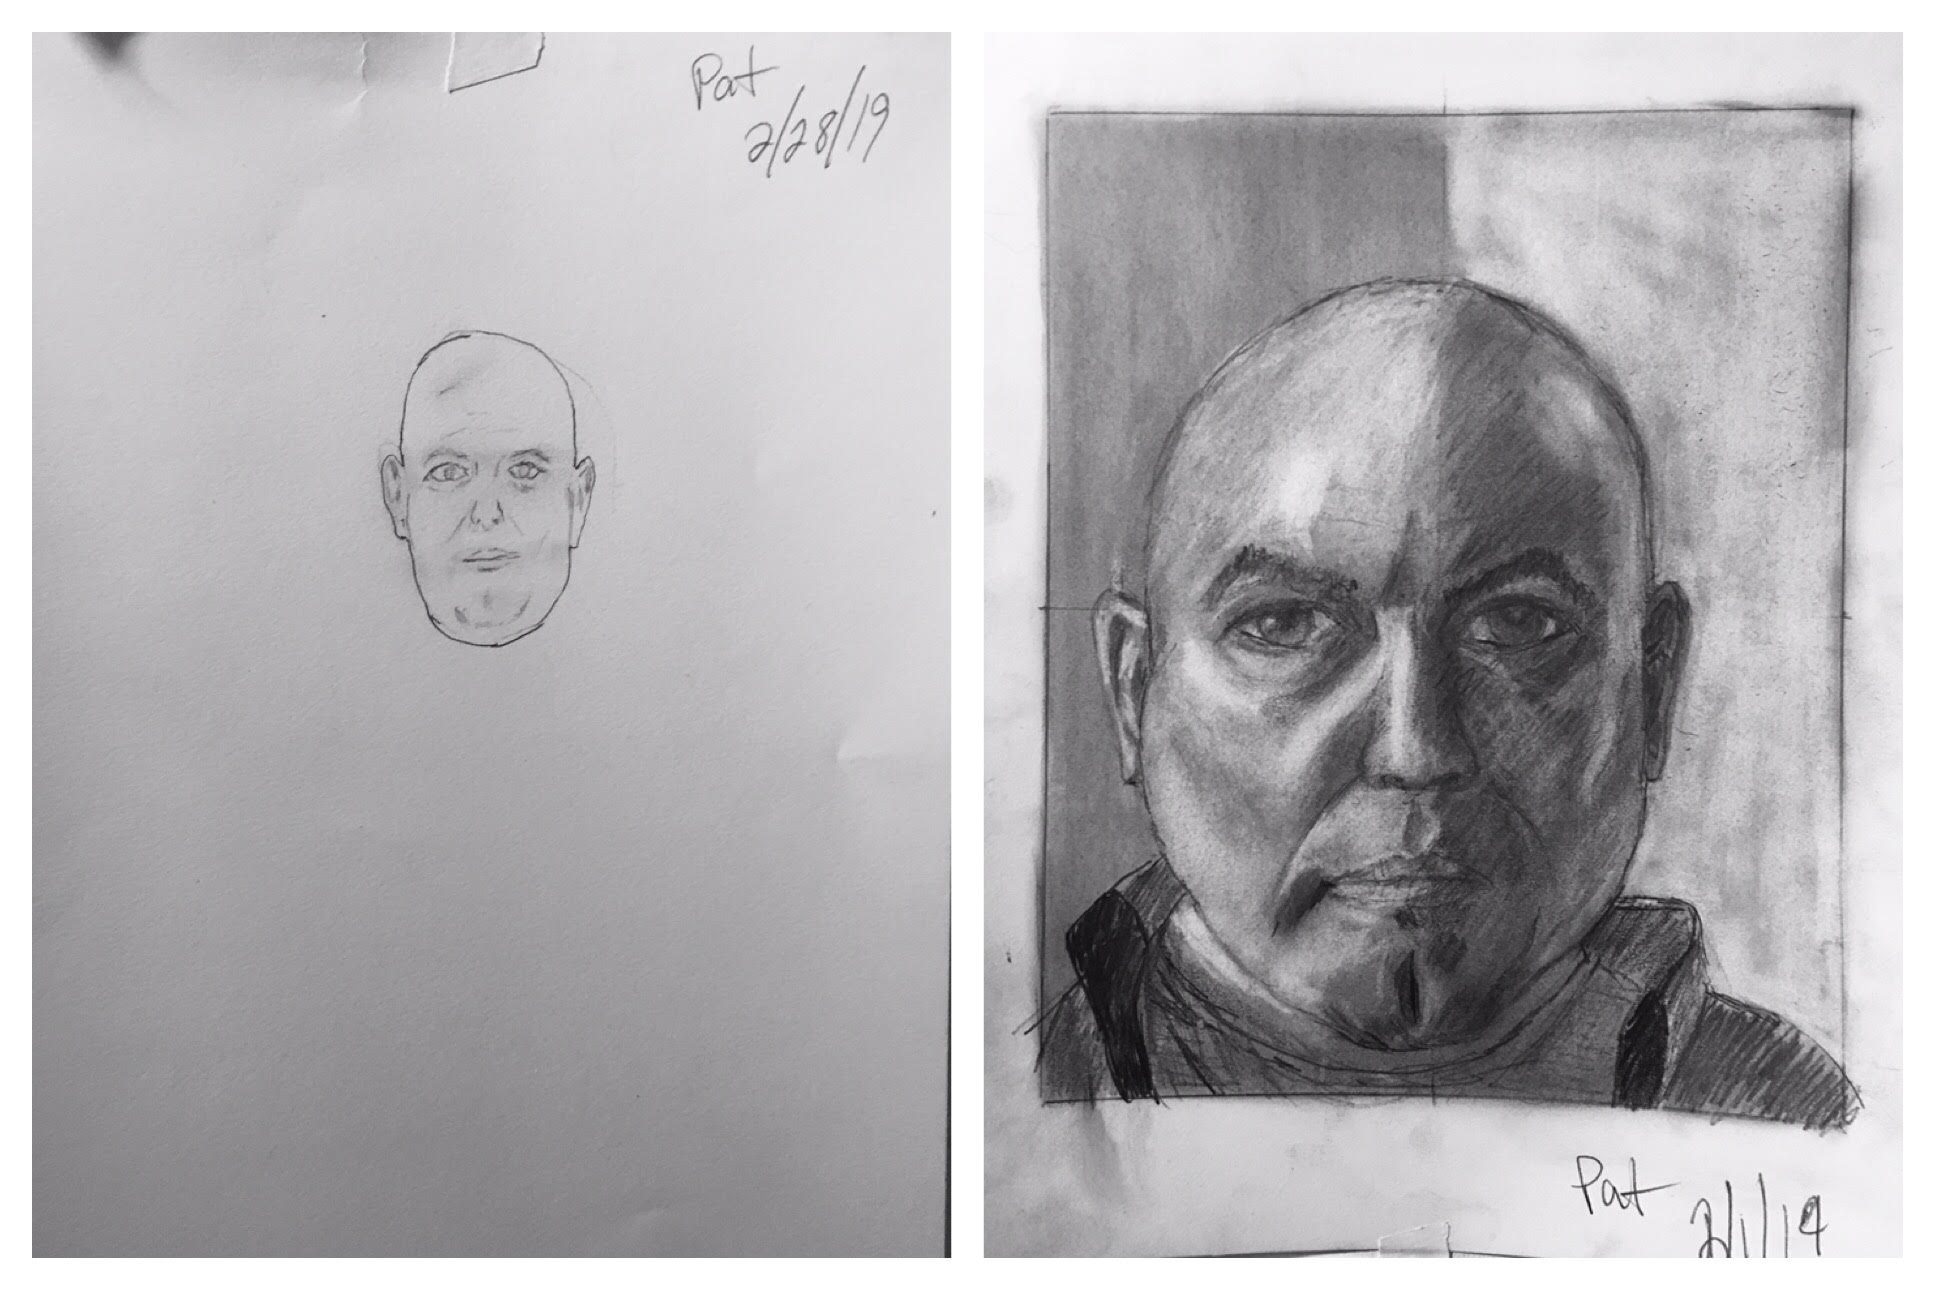 Pat's Before and After Self-Portraits January 2019